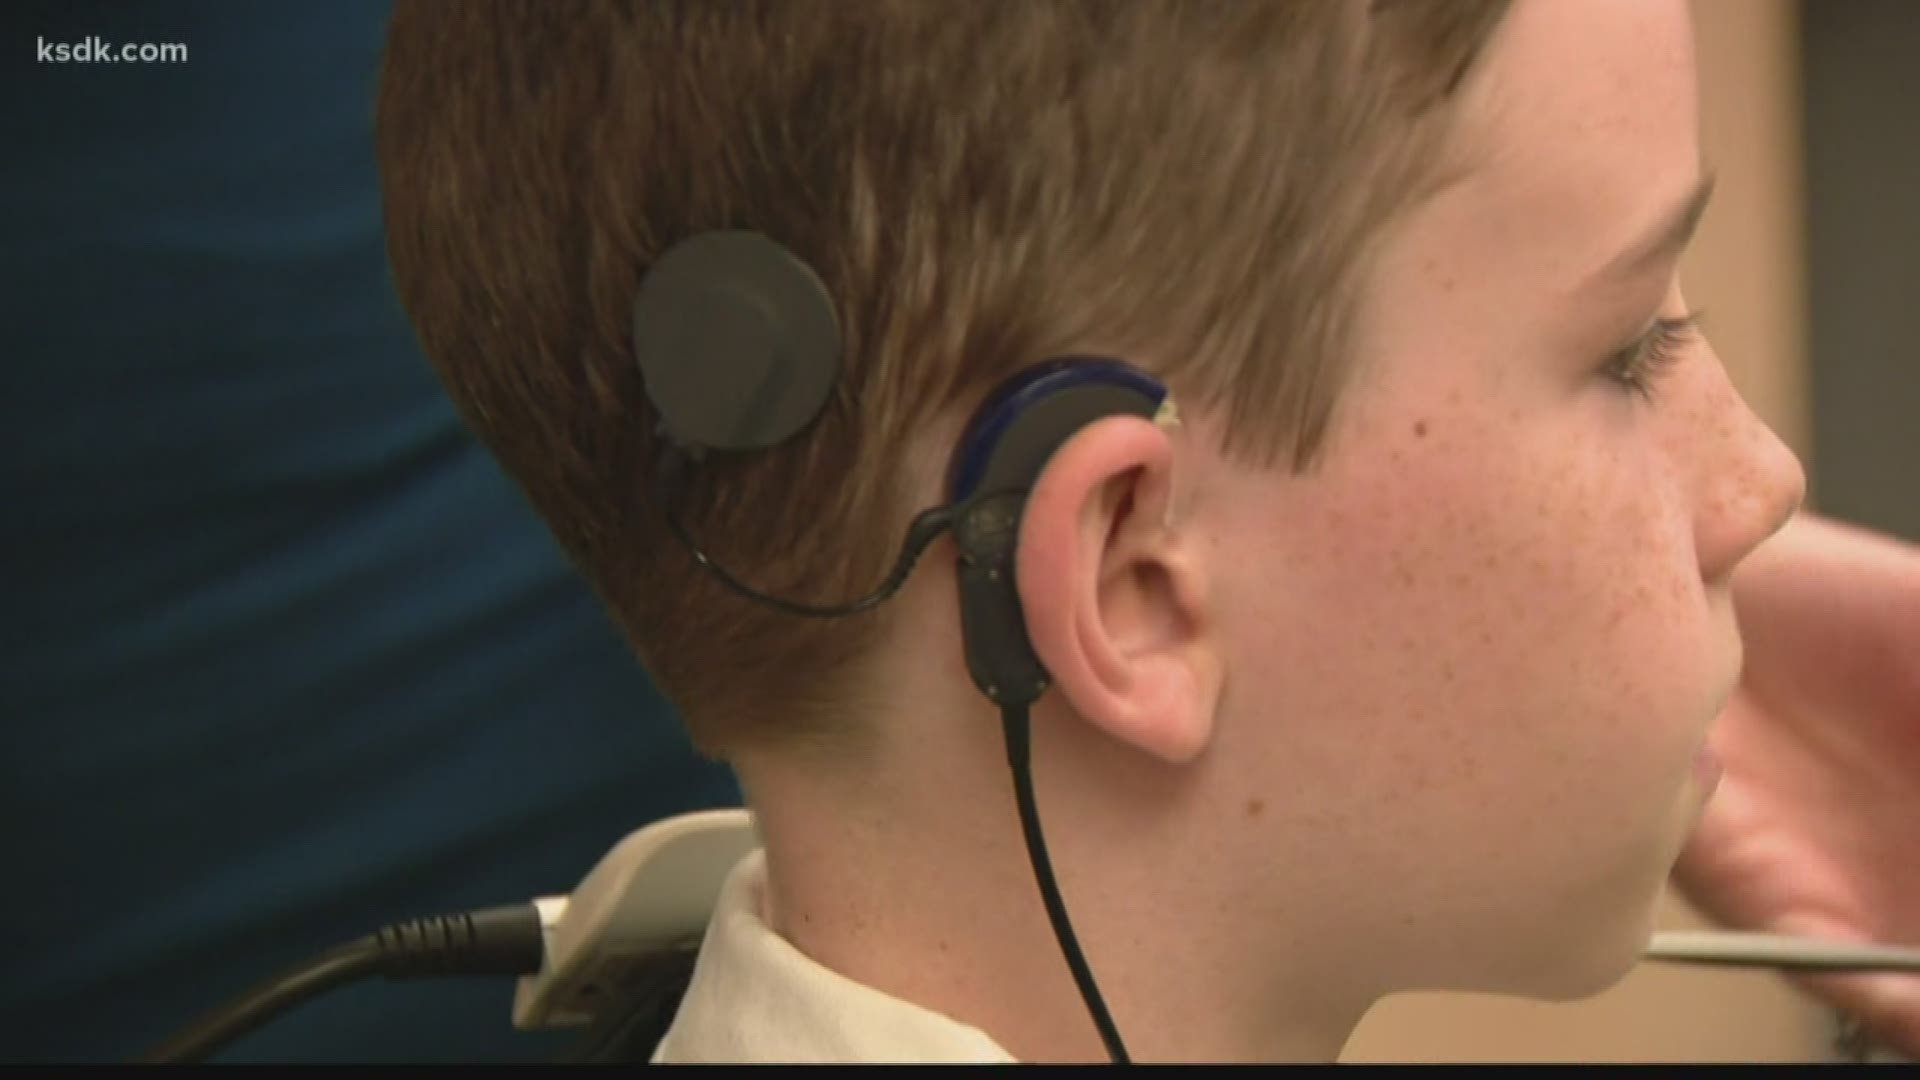 Children's Hospital is filling in the gap for families who need an extra voice in their ear.